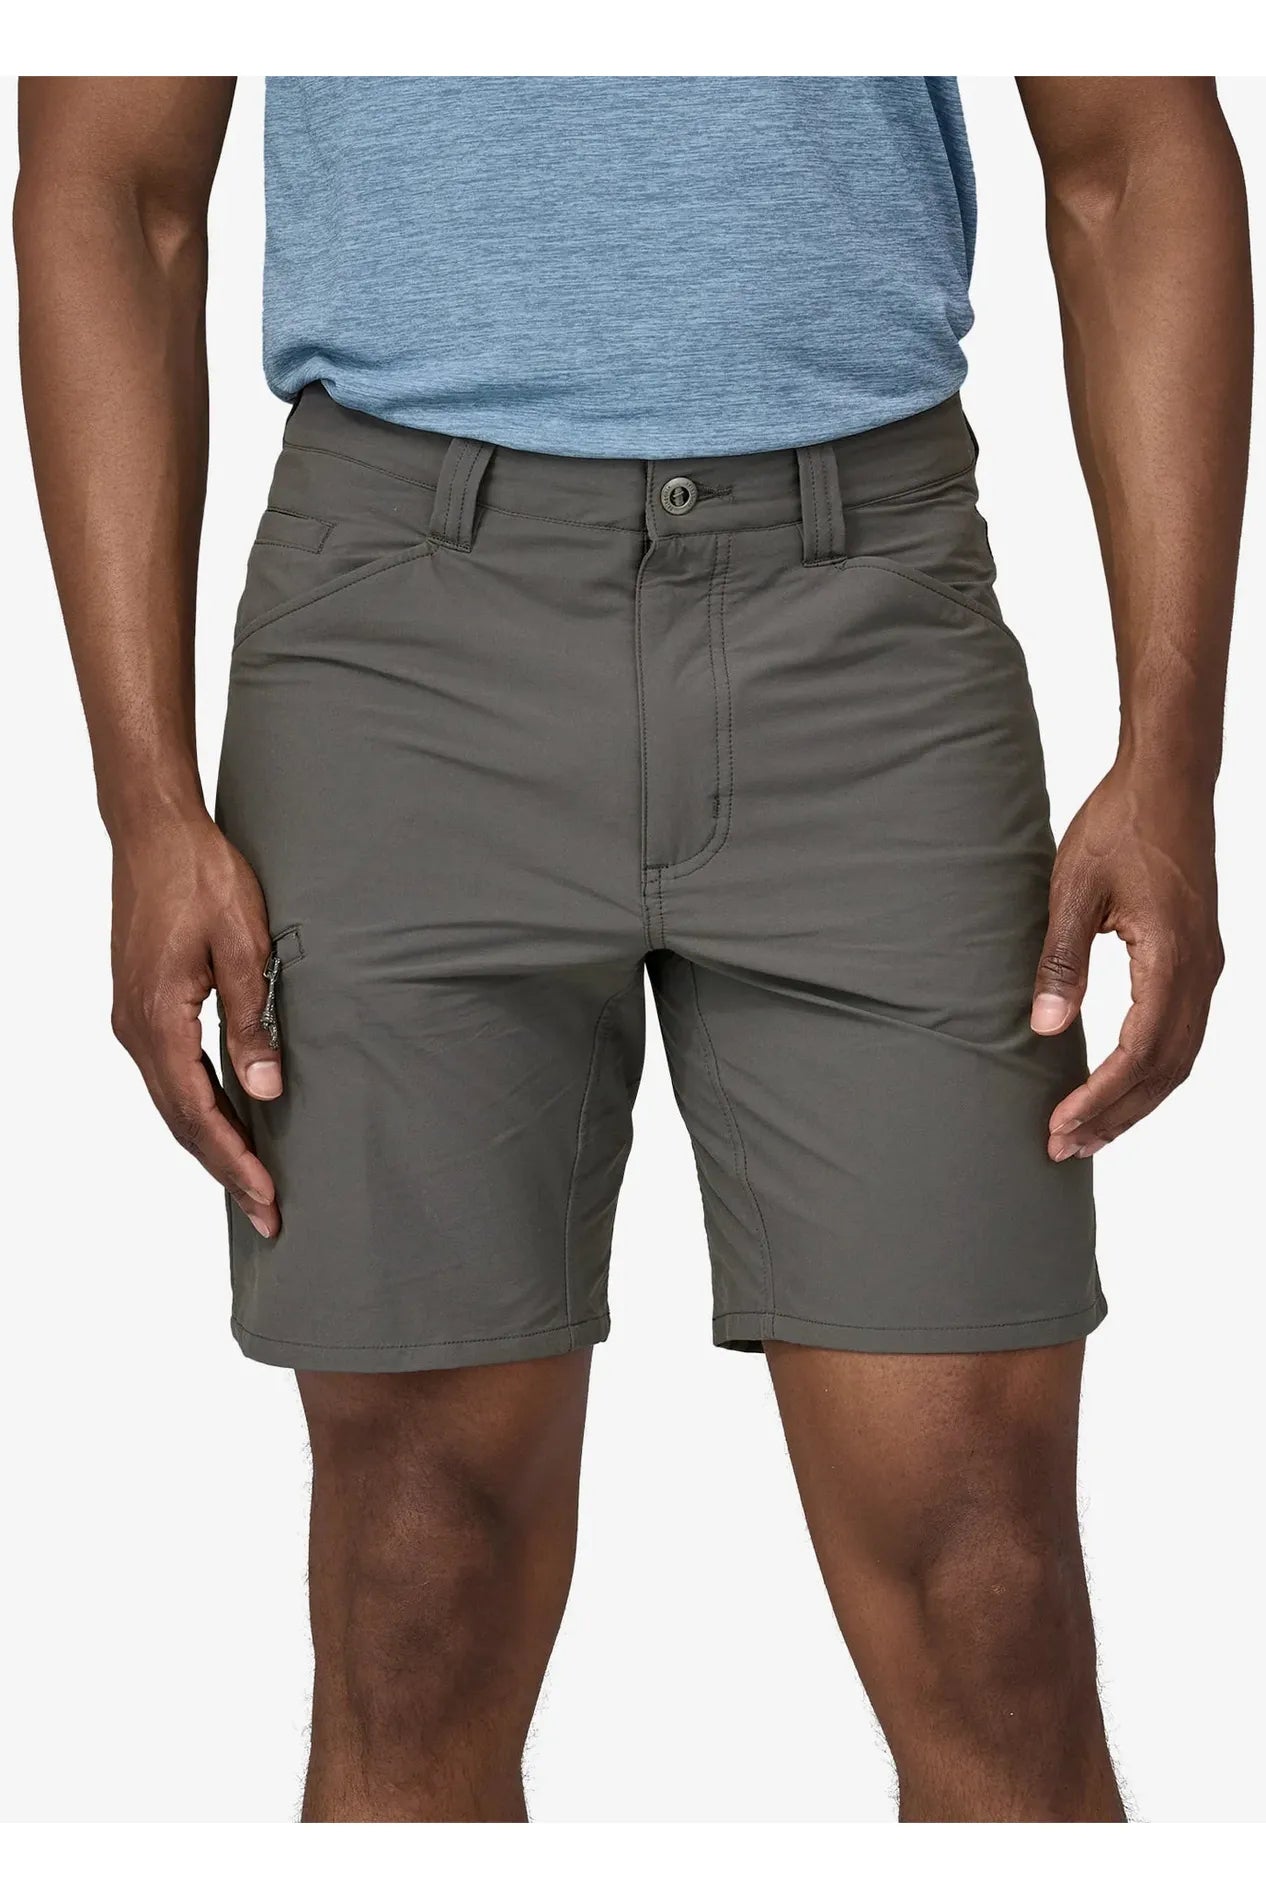 Patagonia Mens Quandary Shorts - 8in Forge Grey